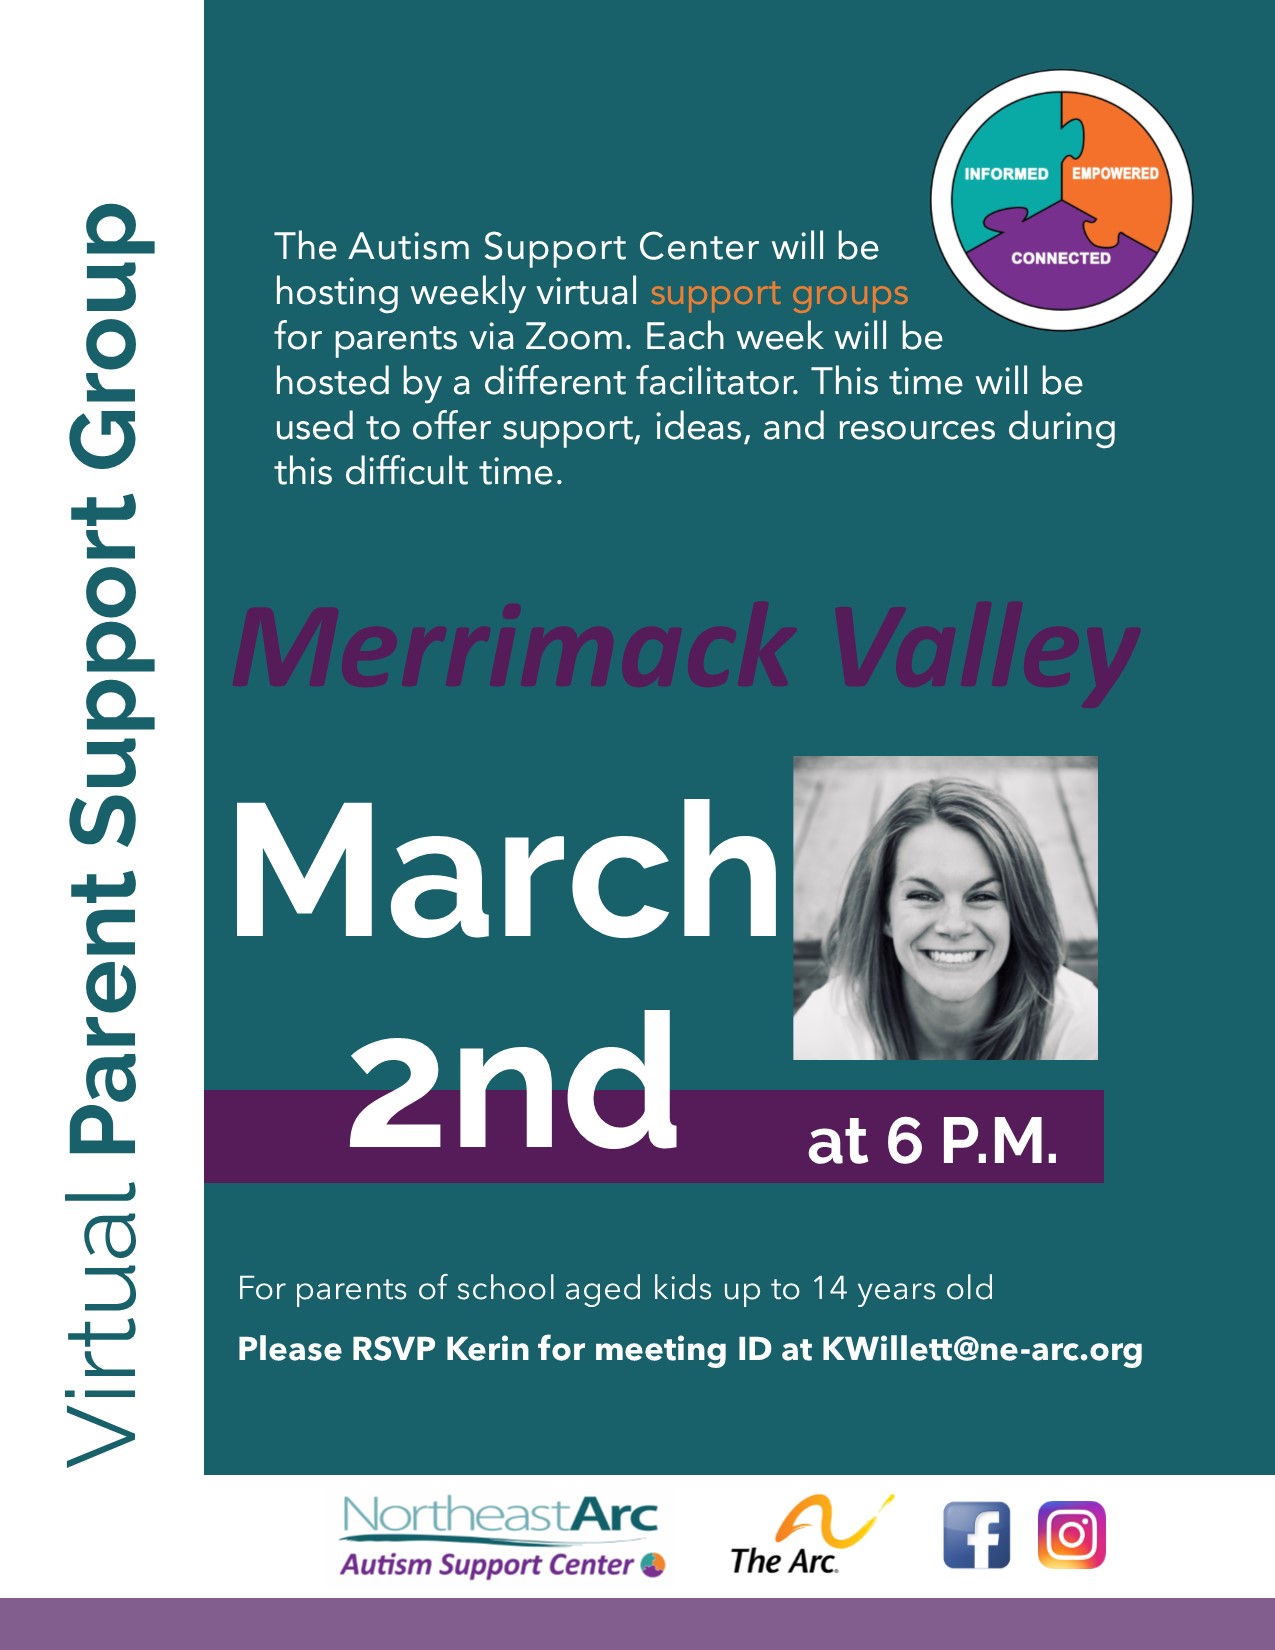 Autism Support Group for Parents of School Age Children up to 14 years old - Merrimack Valley